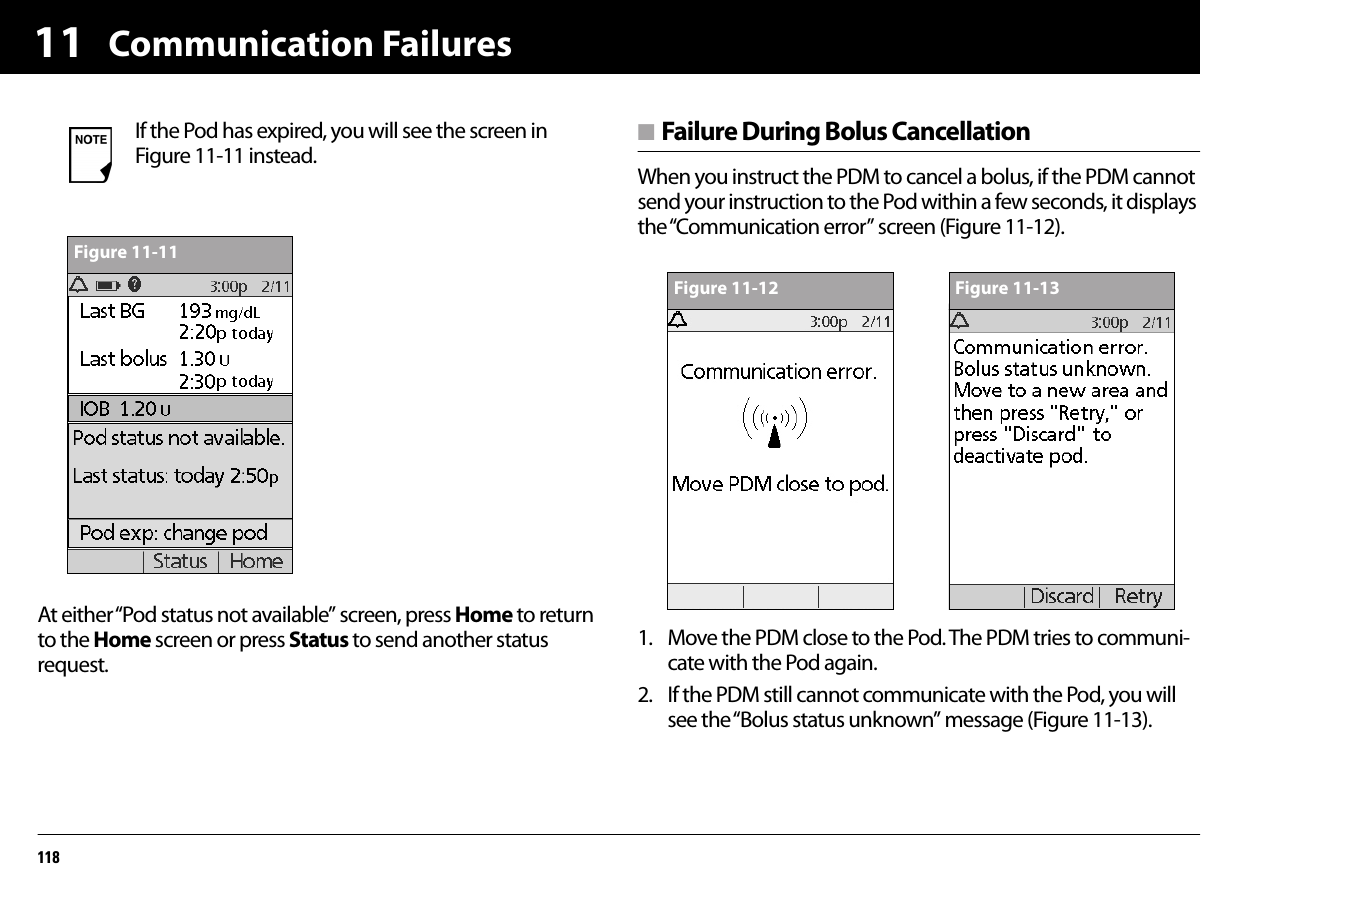 Communication Failures11811At either “Pod status not available” screen, press Home to return to the Home screen or press Status to send another status request.n Failure During Bolus CancellationWhen you instruct the PDM to cancel a bolus, if the PDM cannot send your instruction to the Pod within a few seconds, it displays the “Communication error” screen (Figure 11-12).1. Move the PDM close to the Pod. The PDM tries to communi-cate with the Pod again.2. If the PDM still cannot communicate with the Pod, you will see the “Bolus status unknown” message (Figure 11-13). If the Pod has expired, you will see the screen in Figure 11-11 instead.Figure 11-11Figure 11-12 Figure 11-13